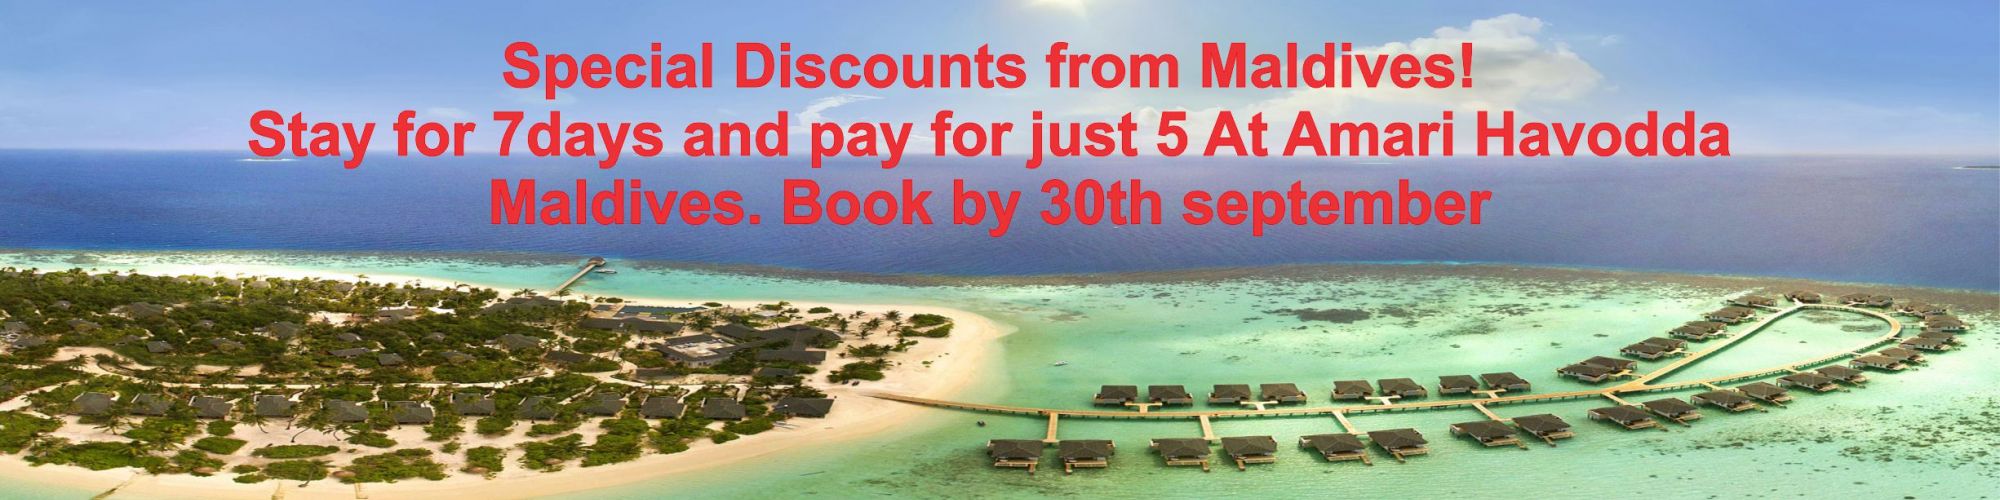 Christmas Special offers from Amari Havodda Maldives